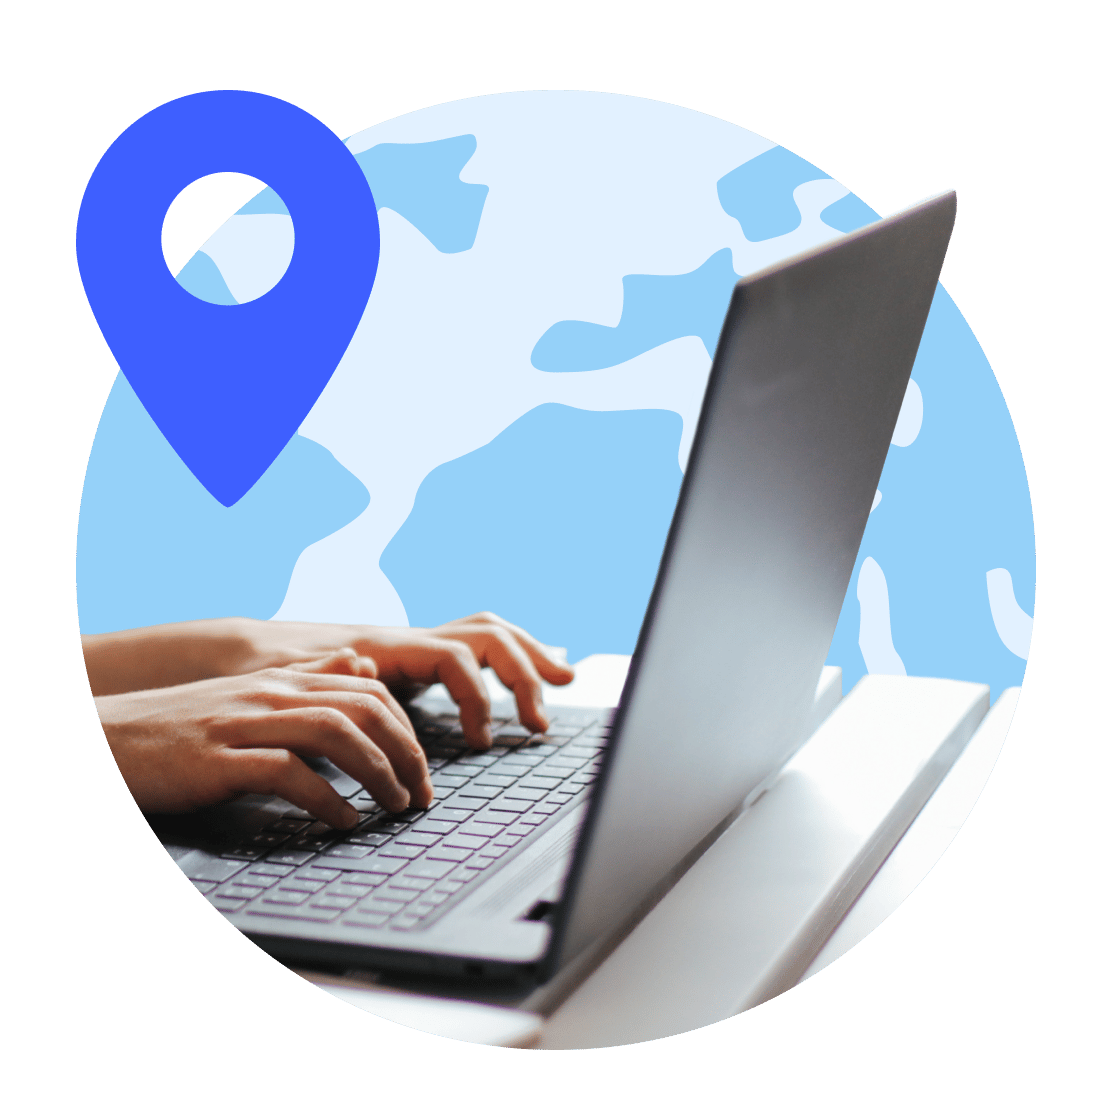 A person is using NordVPN to connect an European server.